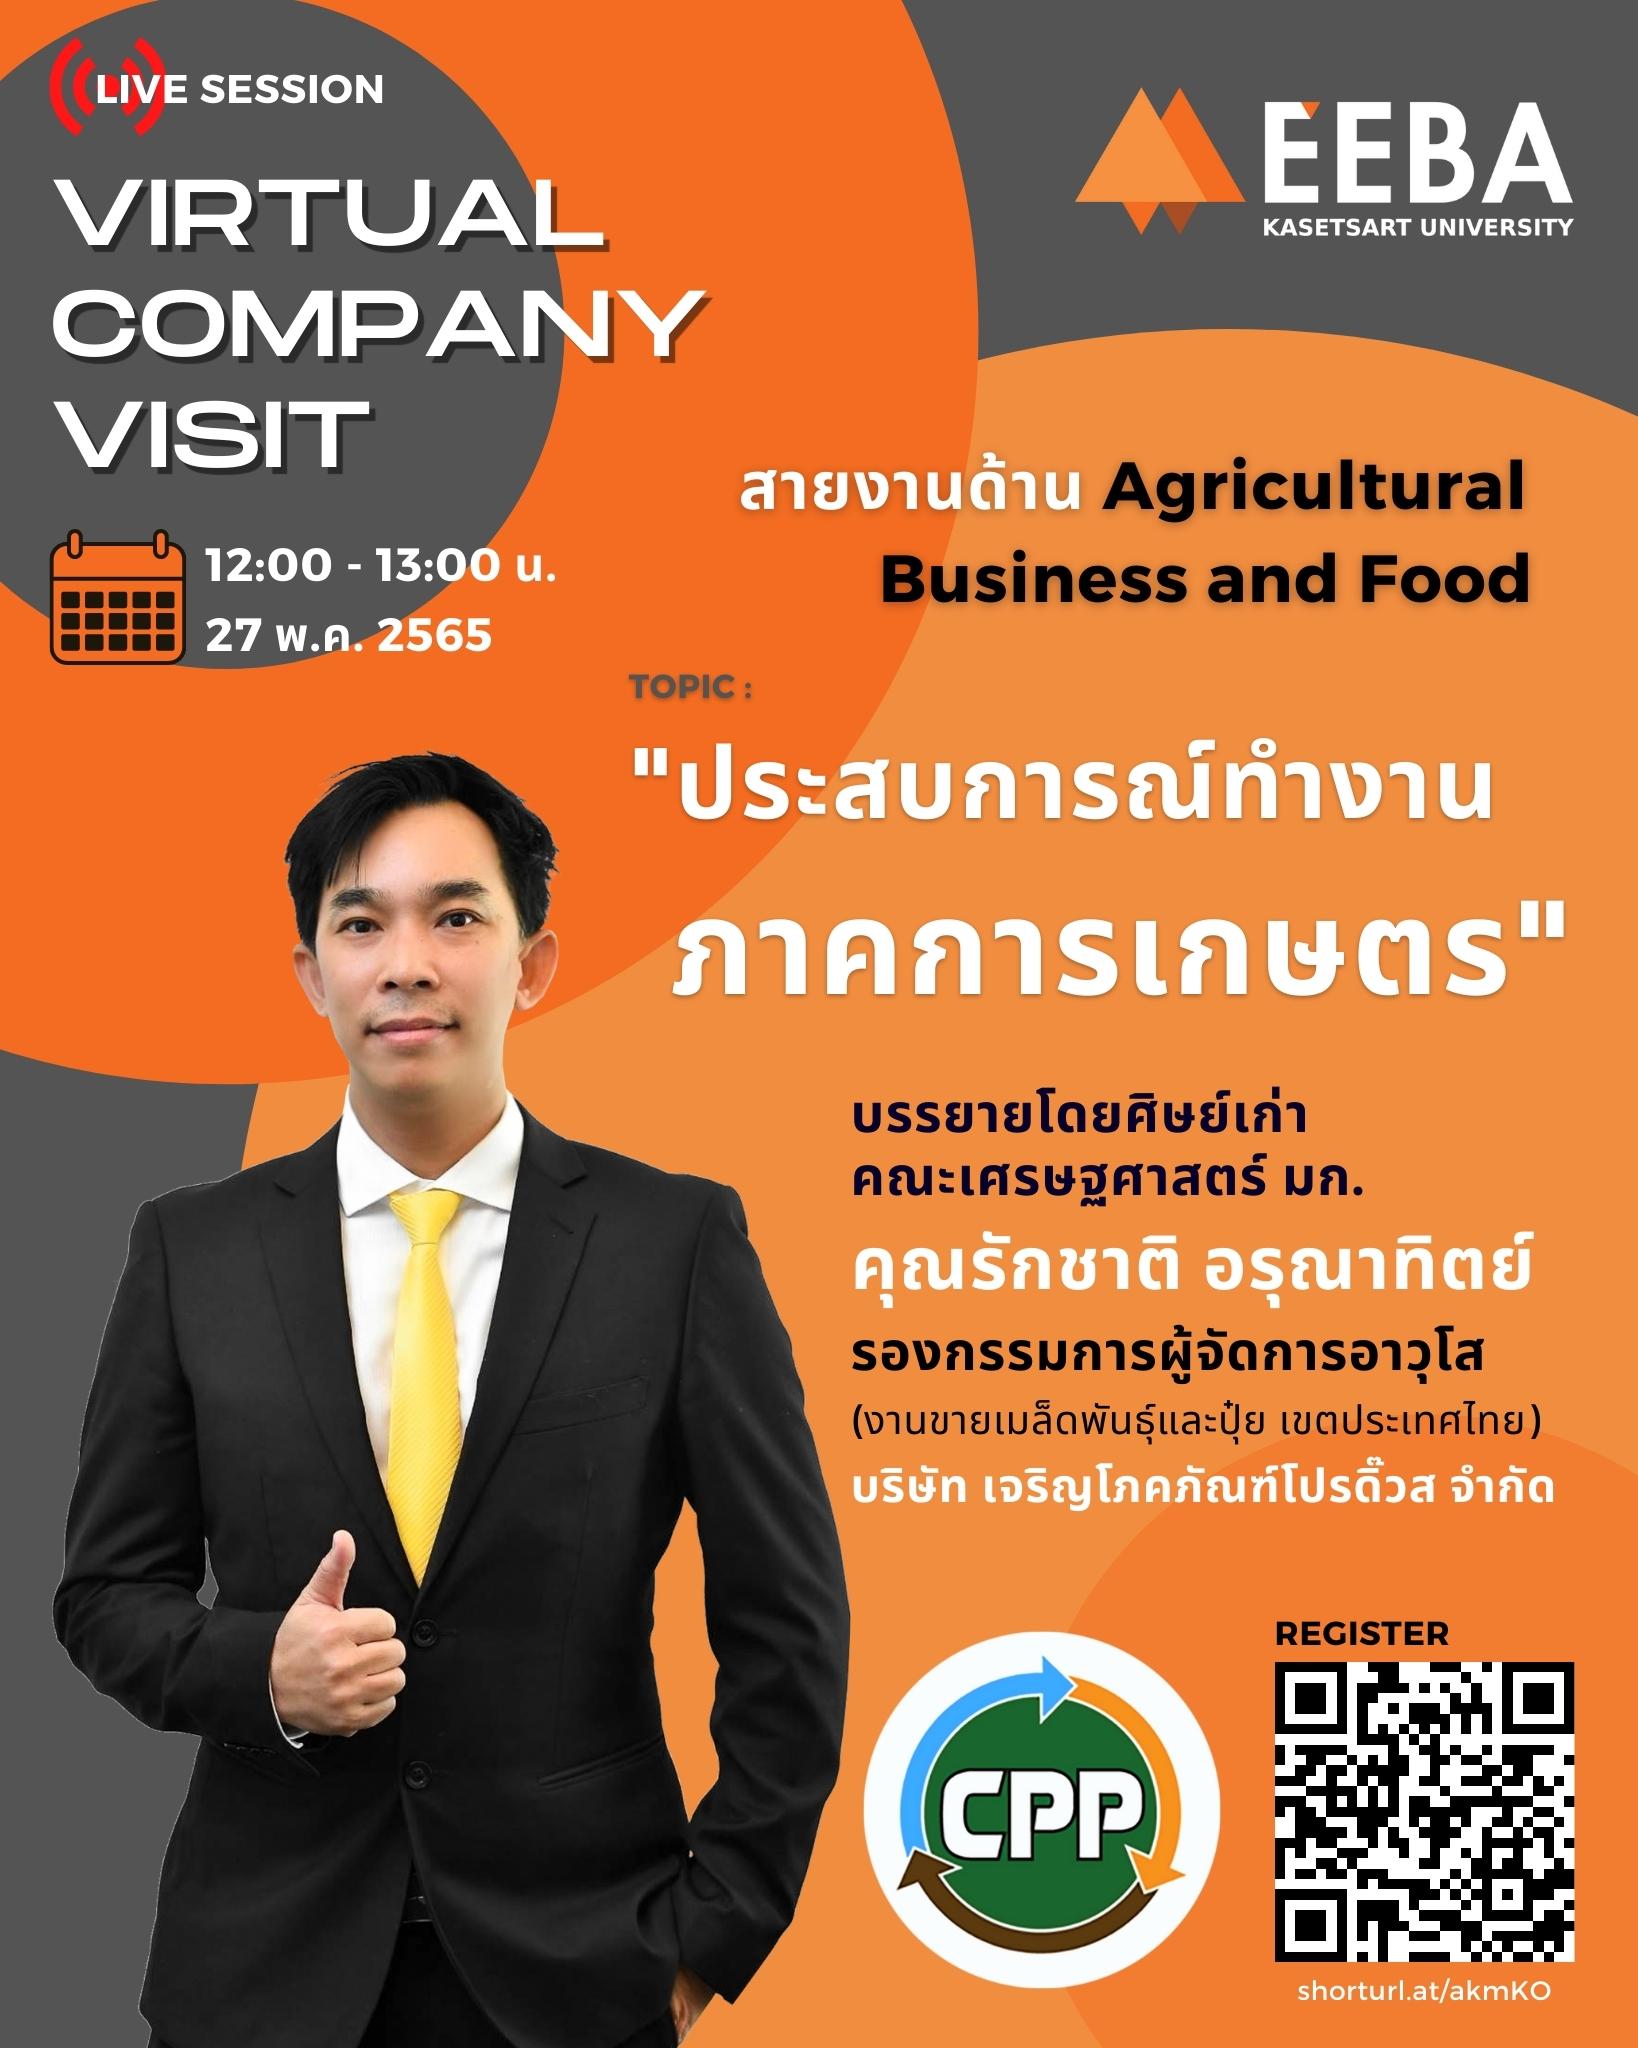 Virtual Company Visit #4 : Agricultural Business and Food by Econ Alumni